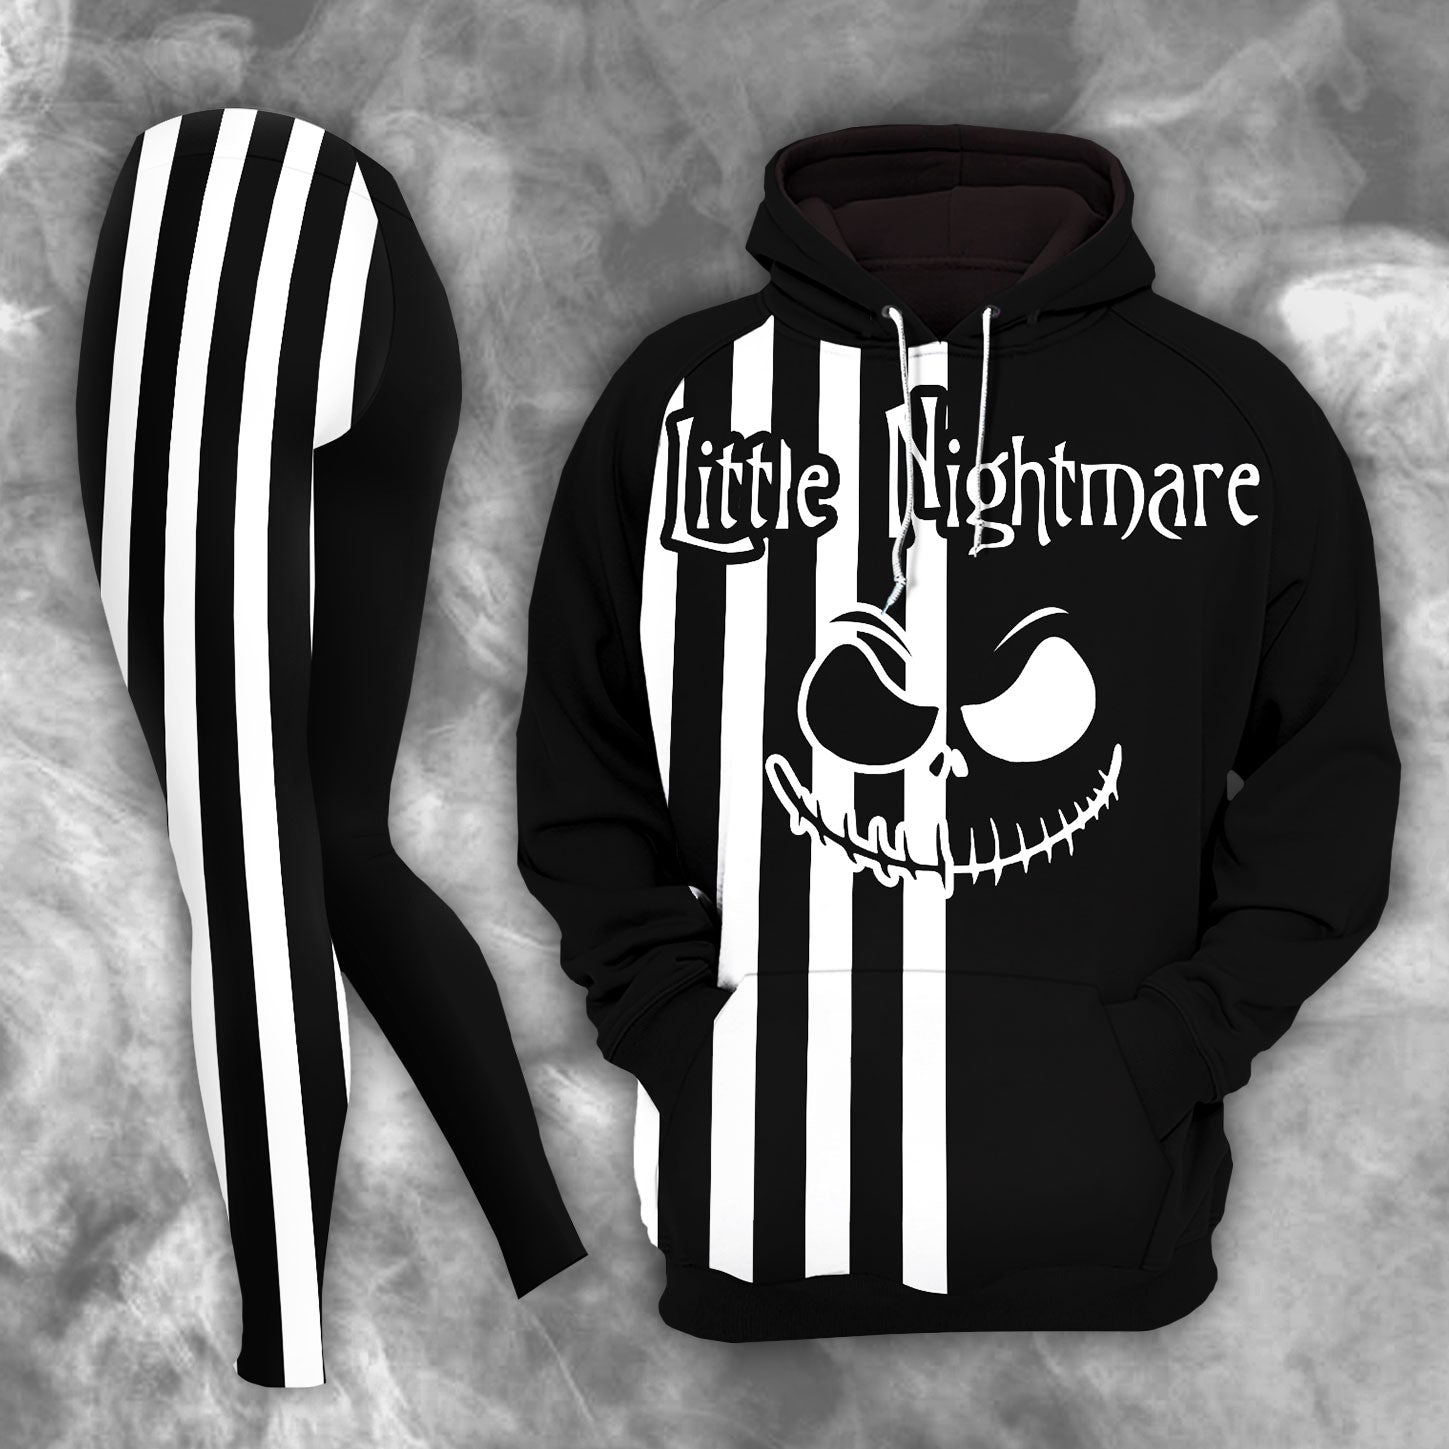  Skull Nightmare Theme Combo Hoodie and Leggings - Dark and edgy matching set with skull designs for a unique and stylish look.